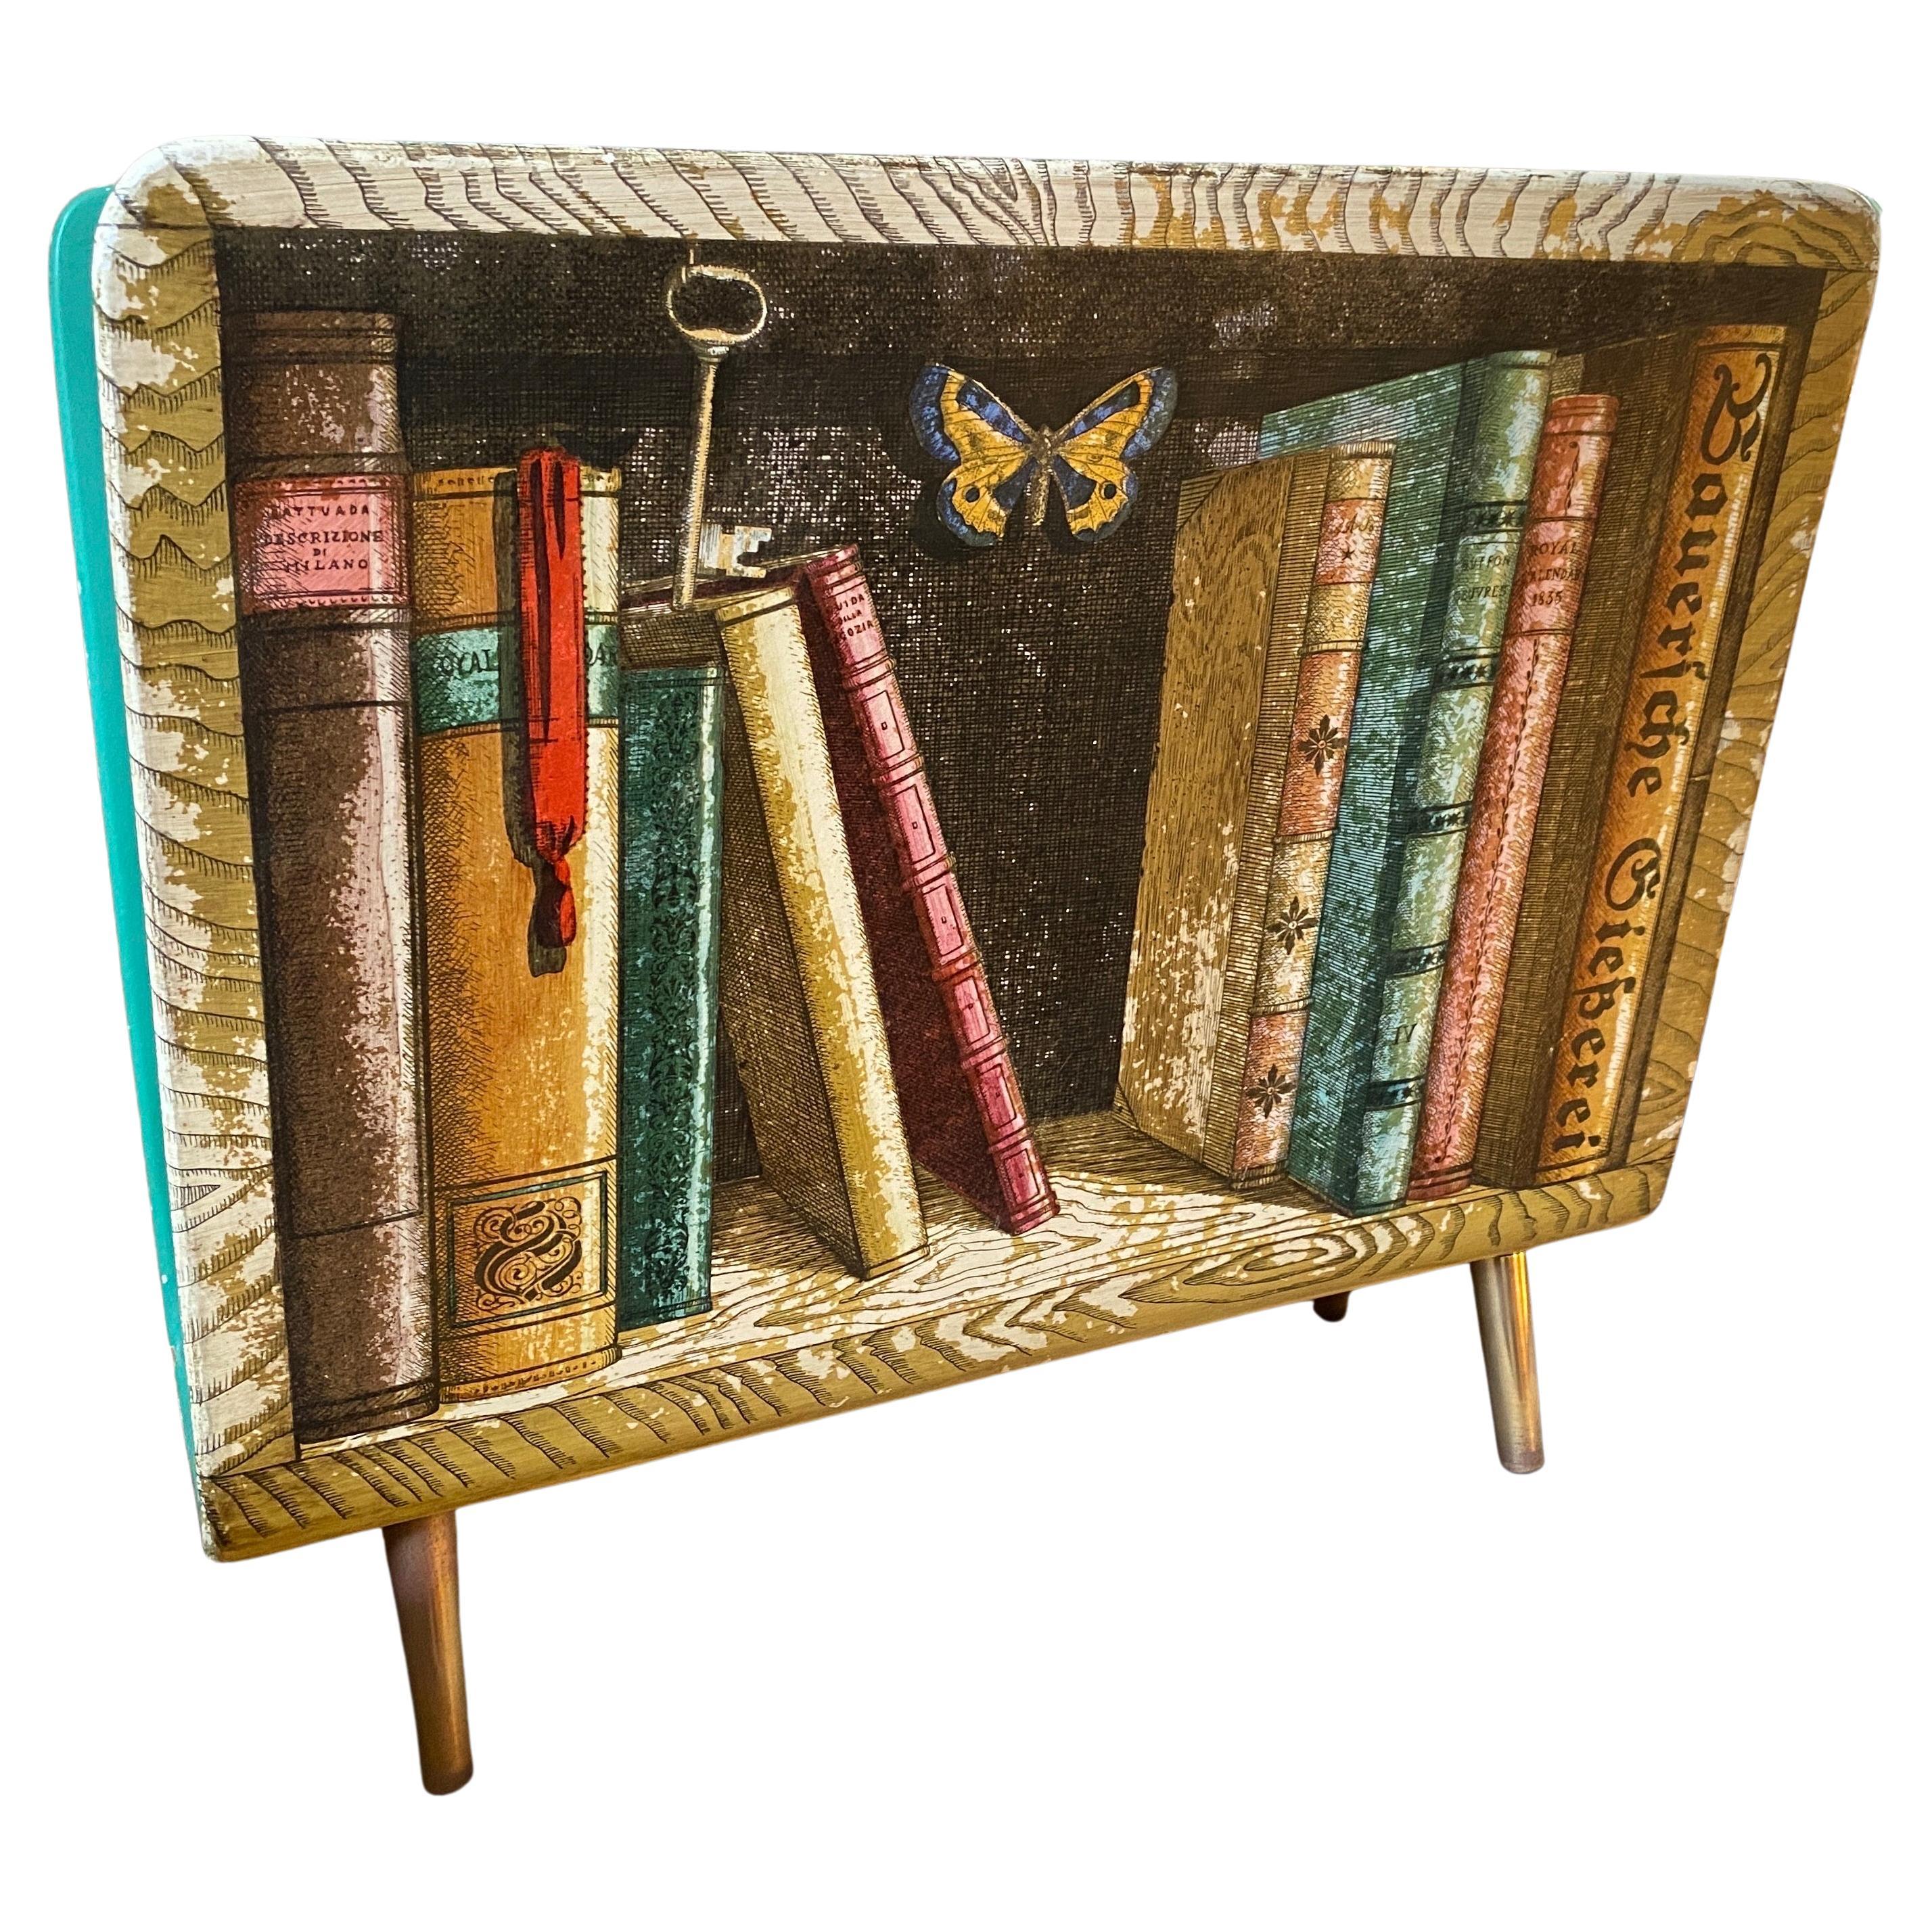 An amazing magazine stand designed by Piero Fornasetti and manufactured by Atelier Fornasetti in Milano in the 1950s. The vintage magazine stand is made of lithographically printed and lacquered plywood depicting an antique bookcasee. it has a brass